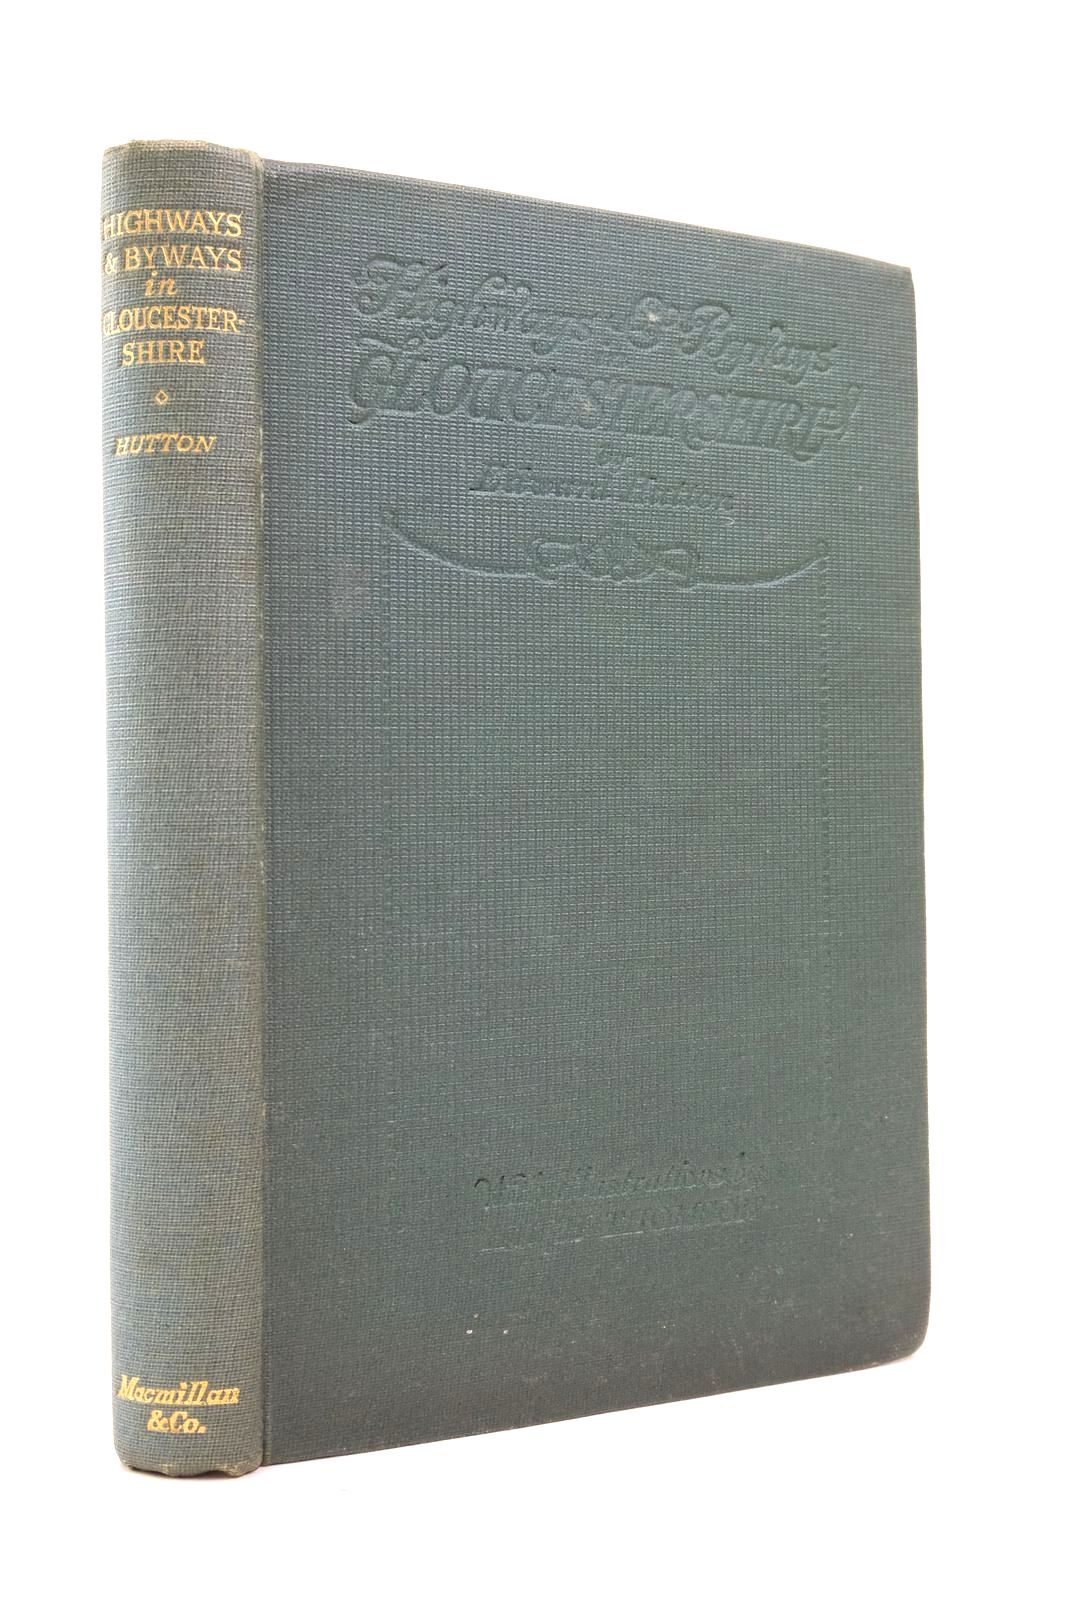 Photo of HIGHWAYS AND BYWAYS IN GLOUCESTERSHIRE written by Hutton, Edward illustrated by Thomson, Hugh published by Macmillan & Co. Ltd. (STOCK CODE: 2137604)  for sale by Stella & Rose's Books